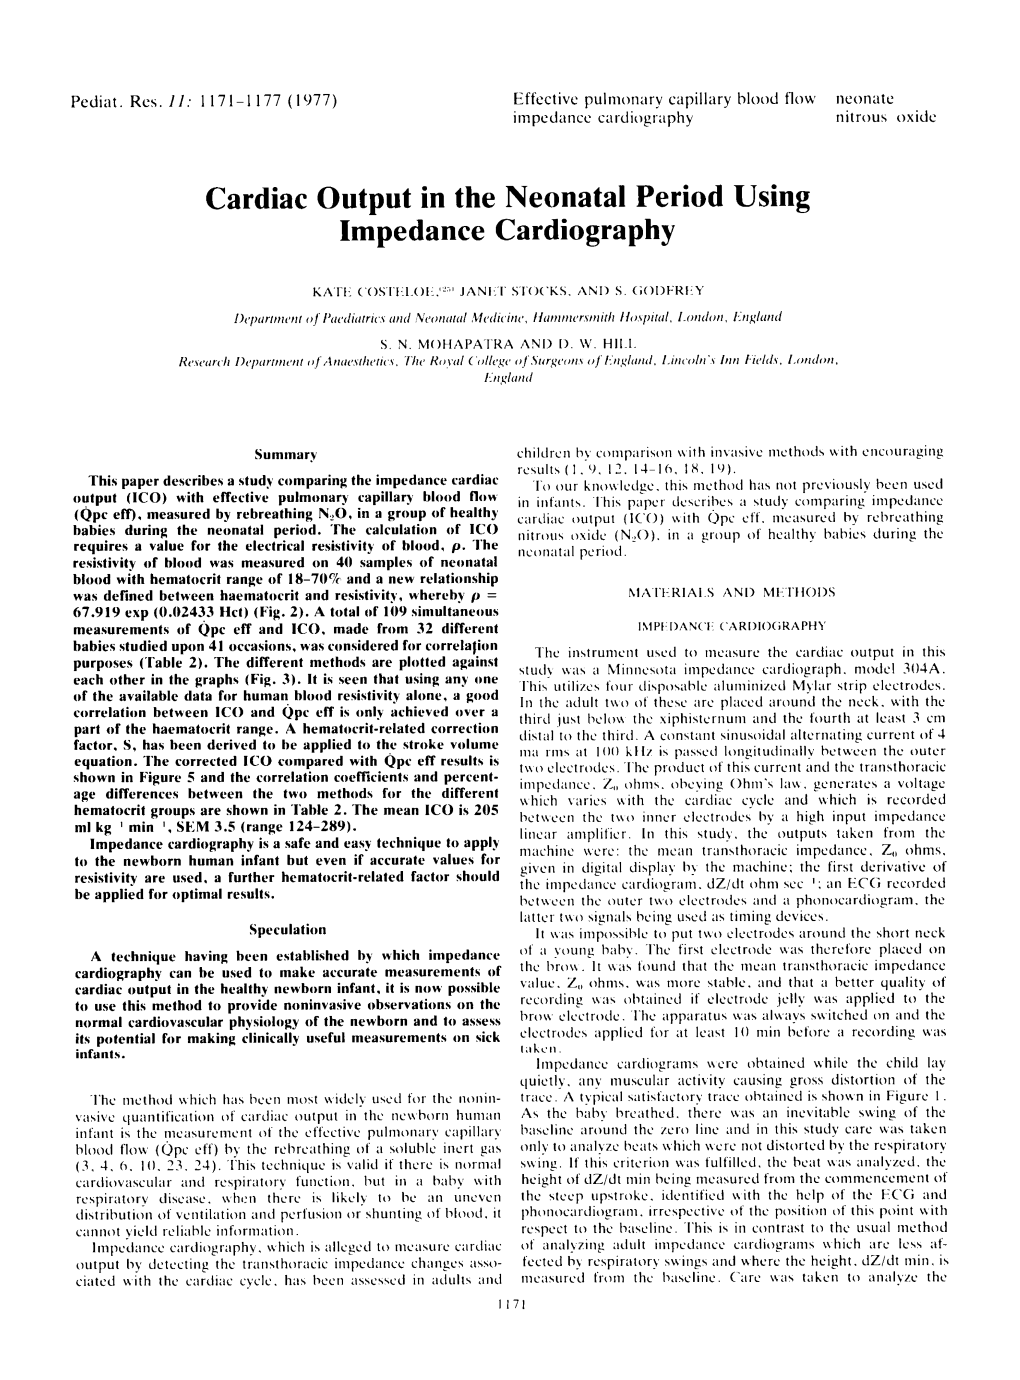 Cardiac Output in the Neonatal Period Using Impedance Cardiography